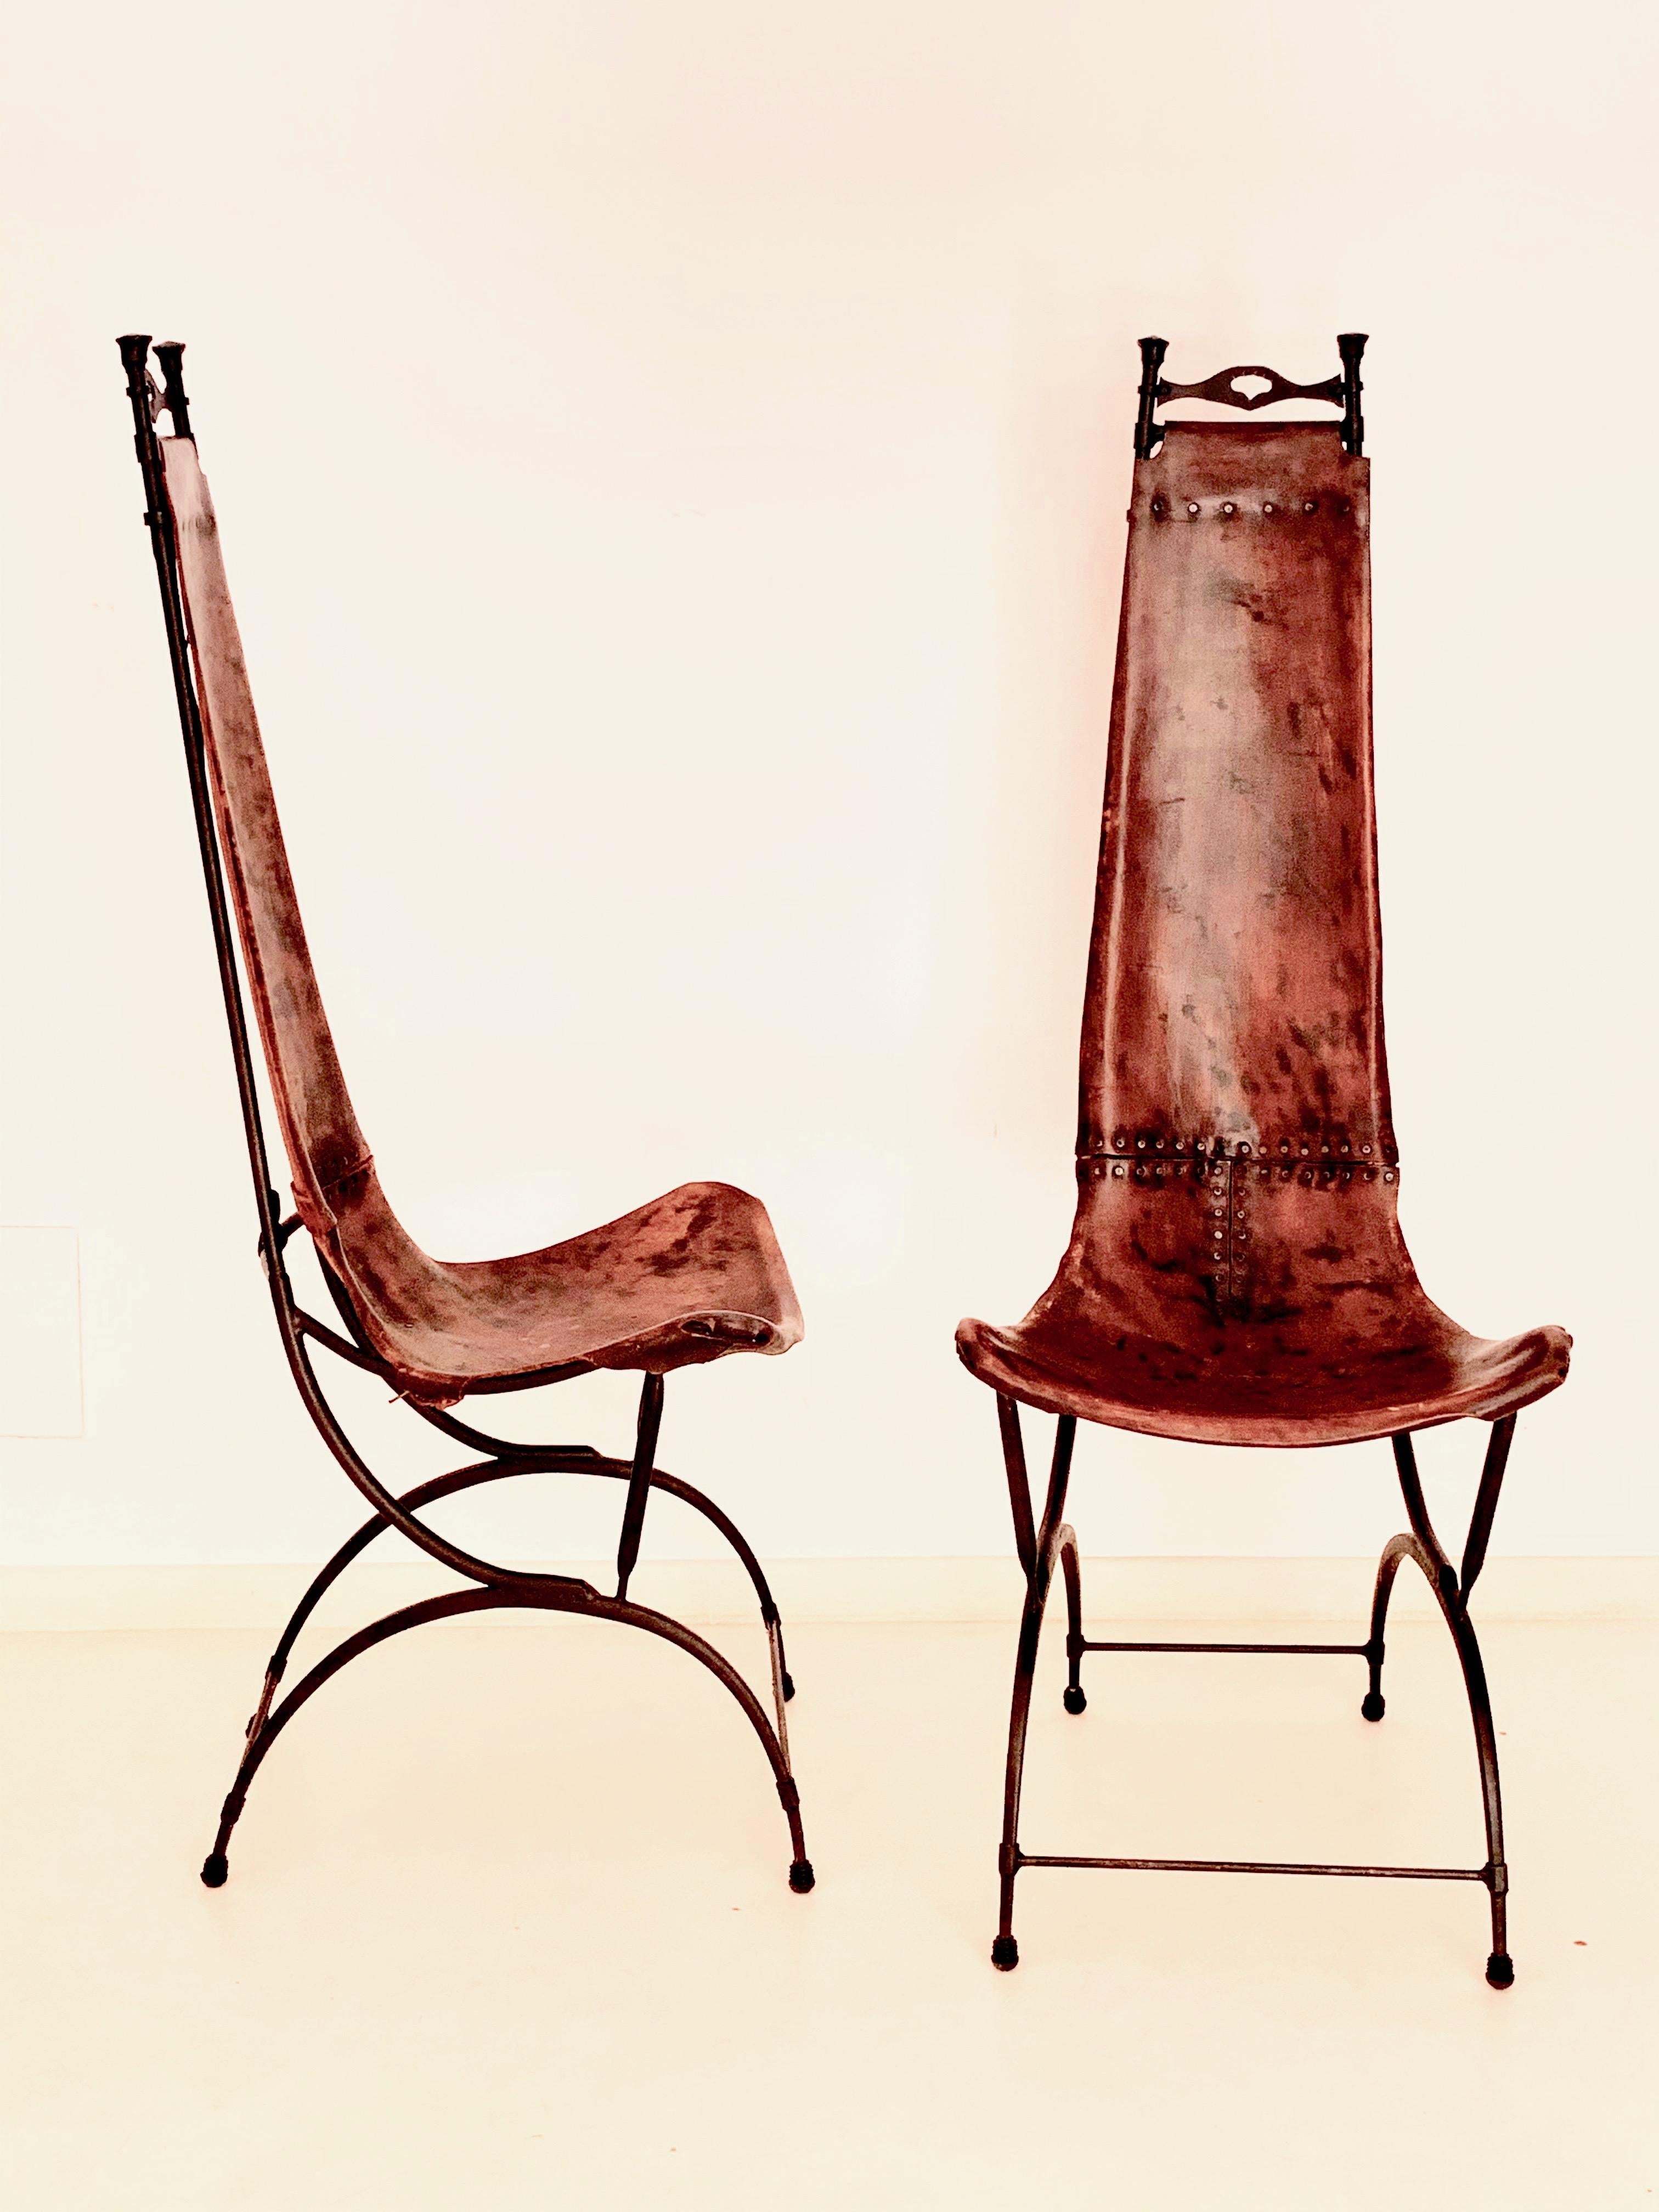 Pair of iron high-back chairs by Sido and François Thevenin for Sawaya & Moroni.
Leather seat
Forged iron structure
Comfortable and sculptural
circa 1970
Good vintage condition
François Thevenin was born in 1931 in Cote d’Azur.
Thevenin is an